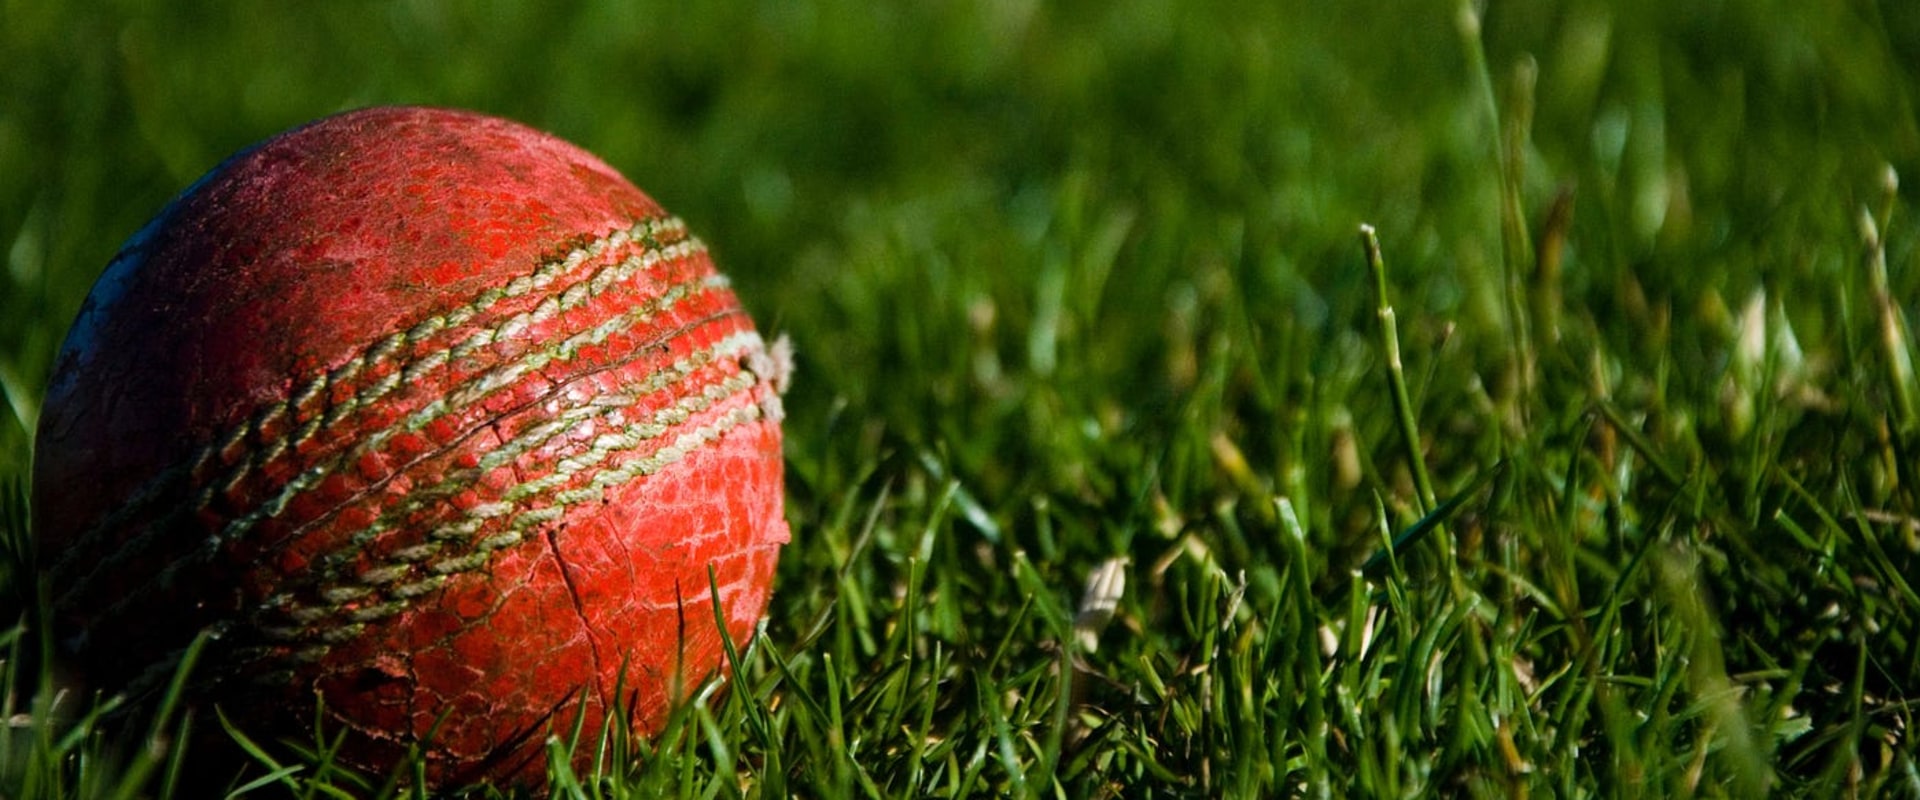 How can i use pitch conditions data to make live cricket predictions?